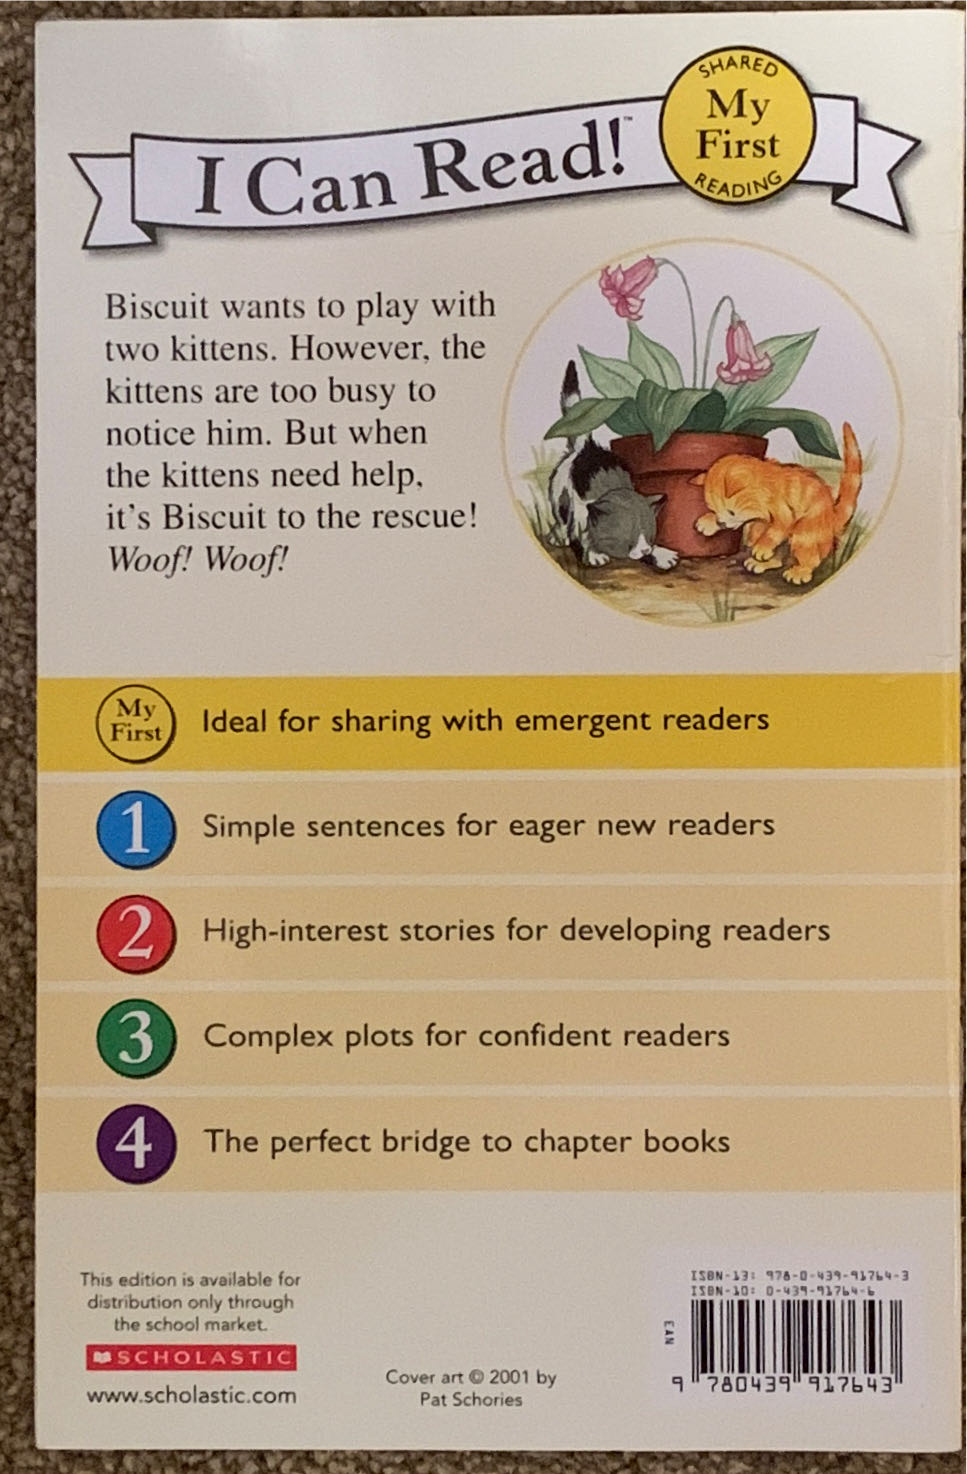 Biscuit Wants to Play - Alyssa Satin Capucilli (A Scholastic Press - Paperback) book collectible [Barcode 9780439917643] - Main Image 2